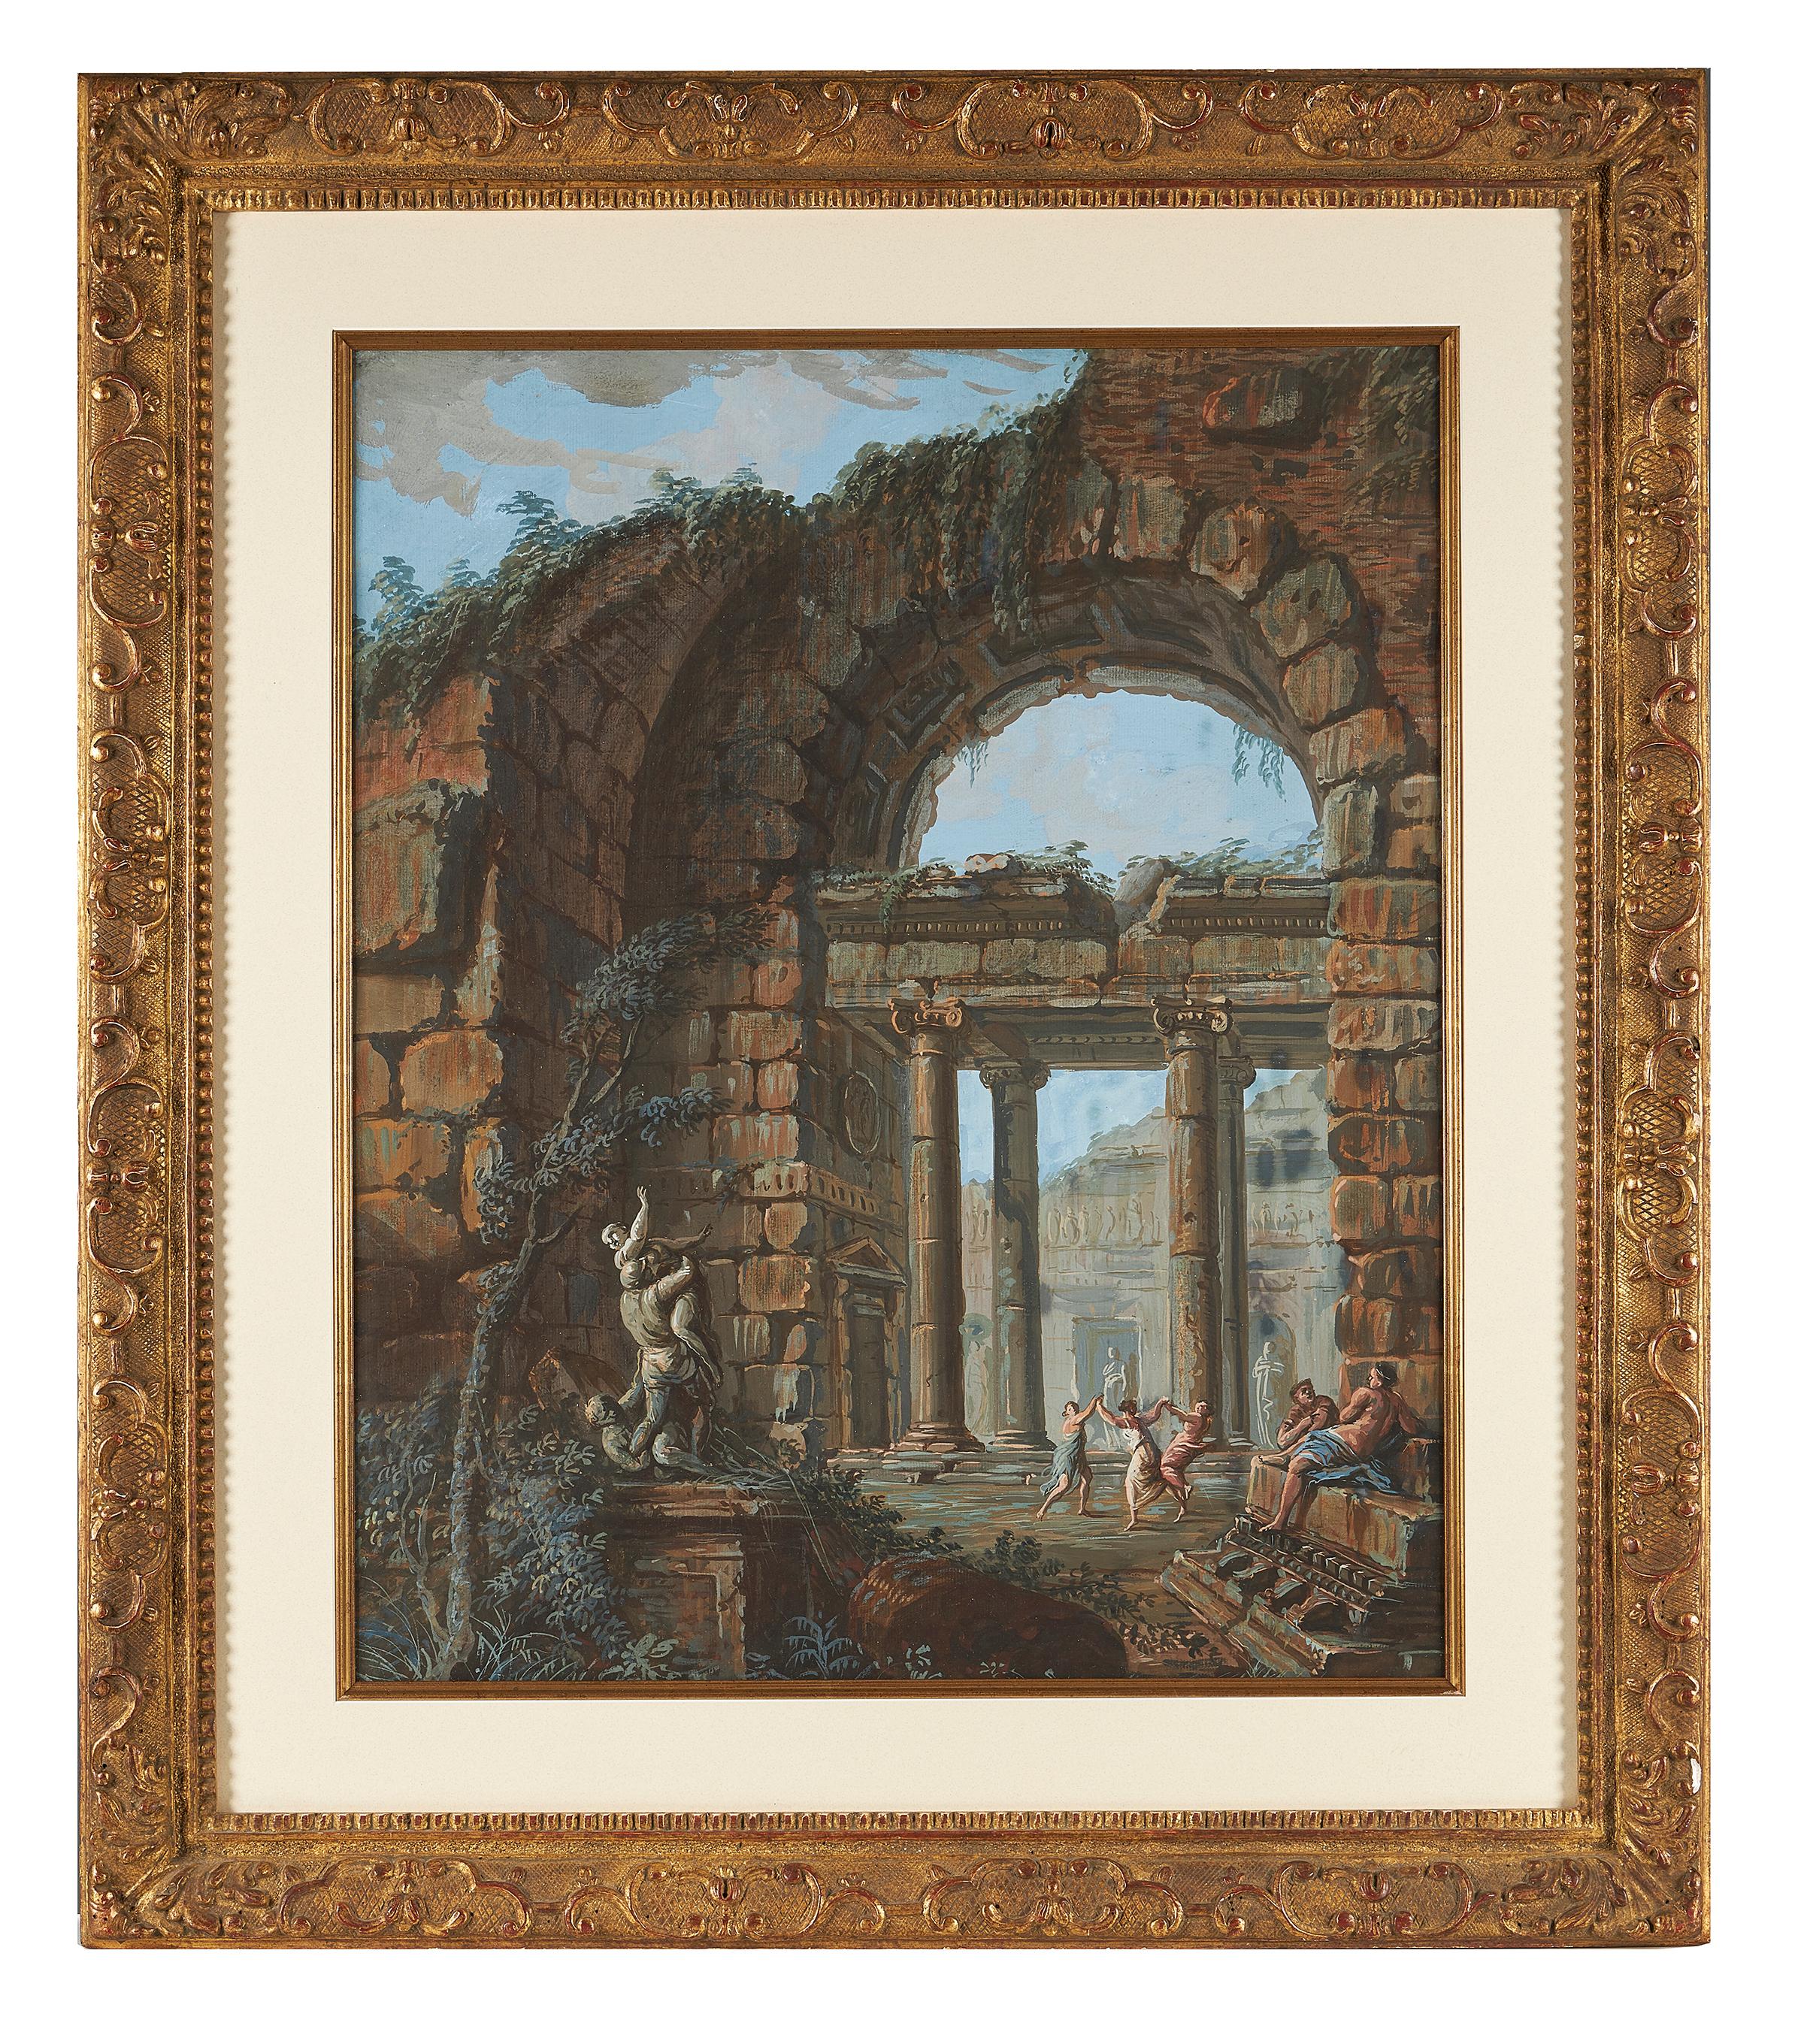 Charles-Louis Clerisseau (French, 1721-1820), a depiction of figures dancing amongst Classical ruins, gouache on paper, unsigned, framed. 

Being of the late 18th century, circa 1770-1790, this work is representative of Clerisseu's approach to the